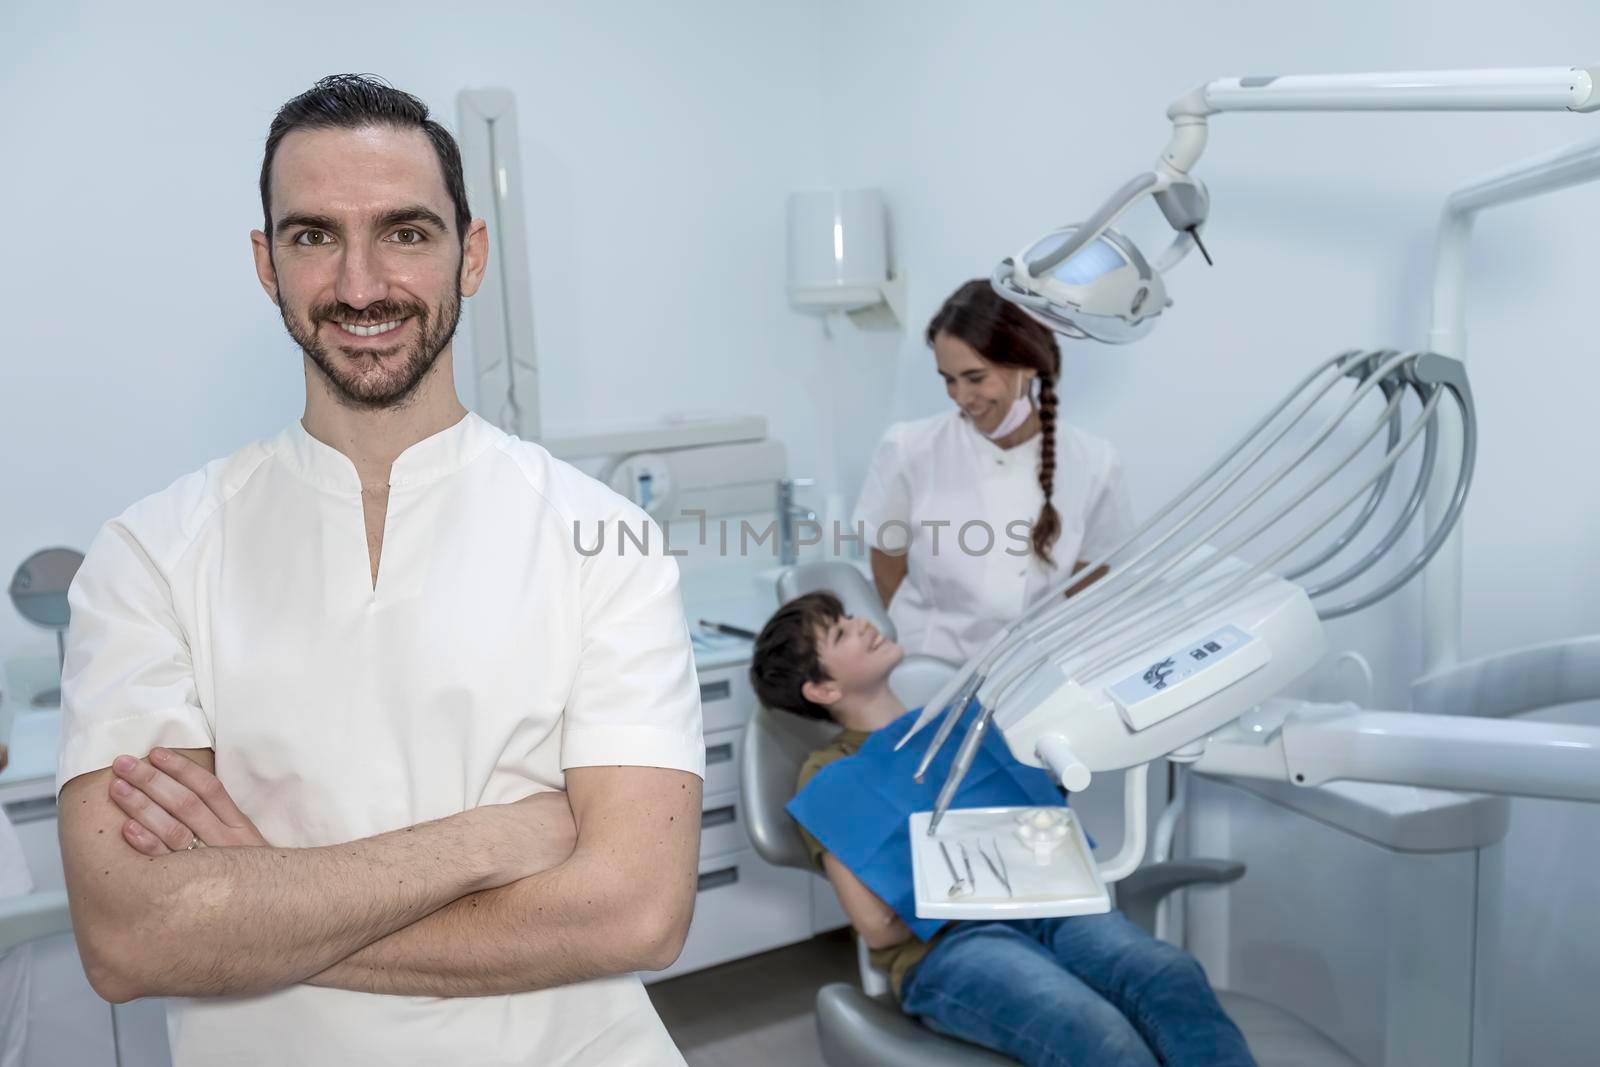 A portrait of a dentist with his team working in the background by Antonelli